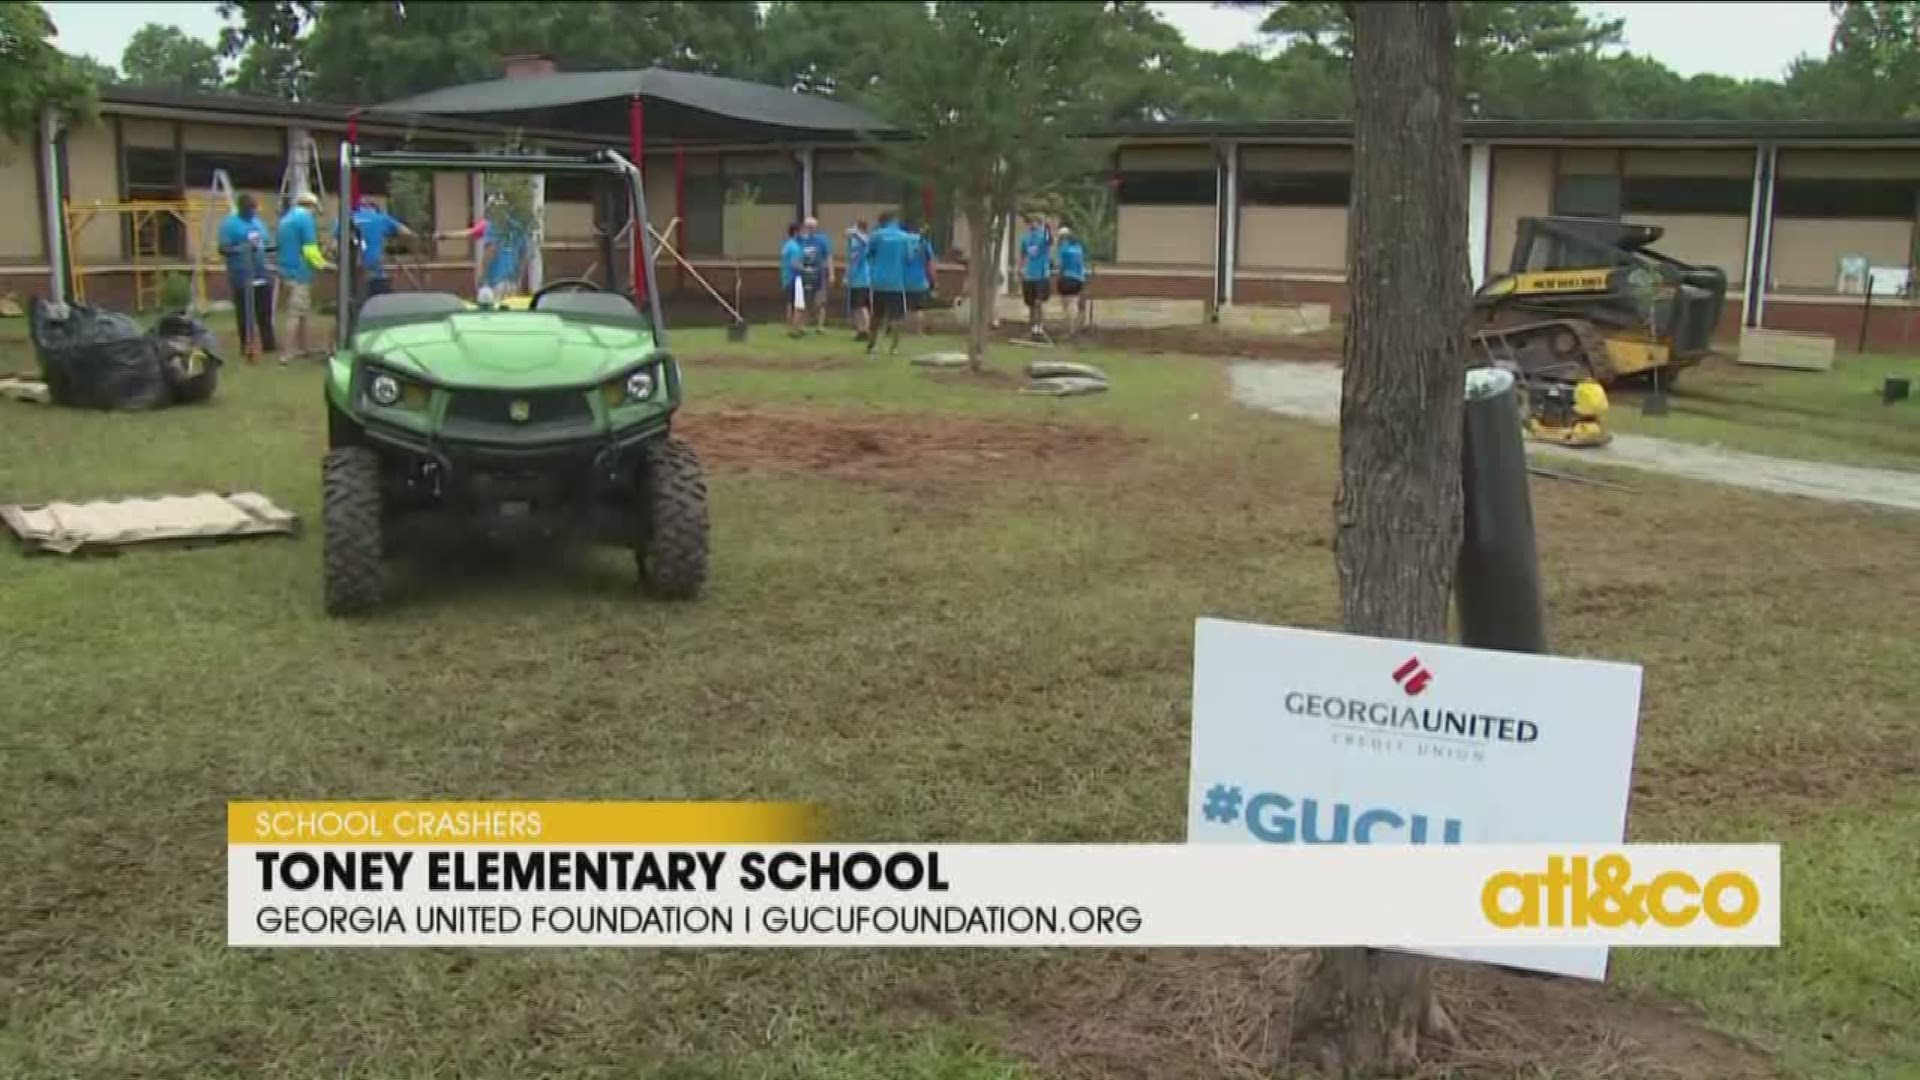 Cara Kneer is with Georgia United Credit Union at their annual School Crashers event, this year revitalizing Toney Elementary.